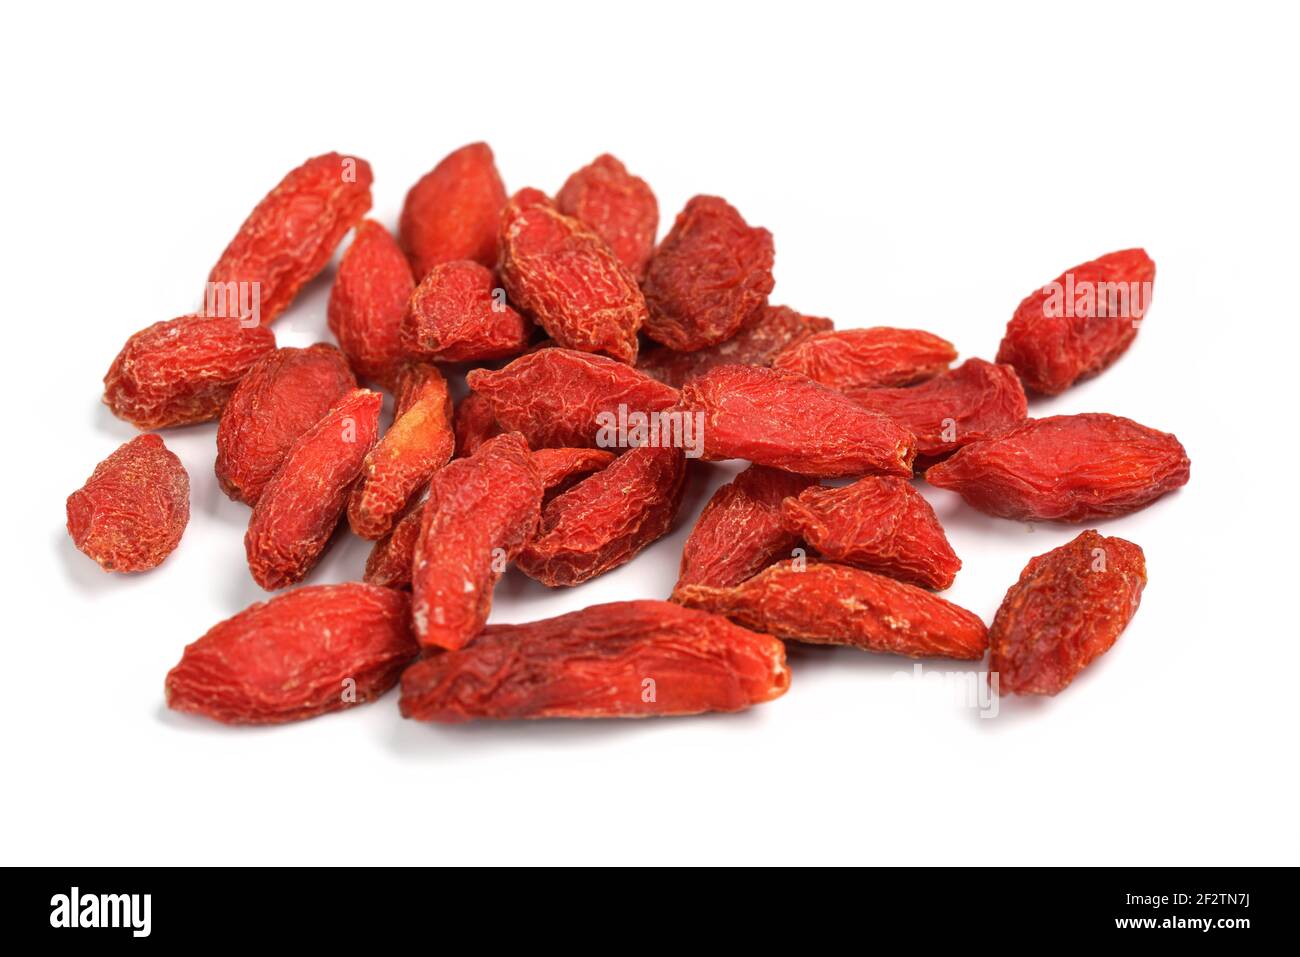 Closeup photo of goji berry (wolfberry - Lycium chinense) dried fruits isolated on white background Stock Photo